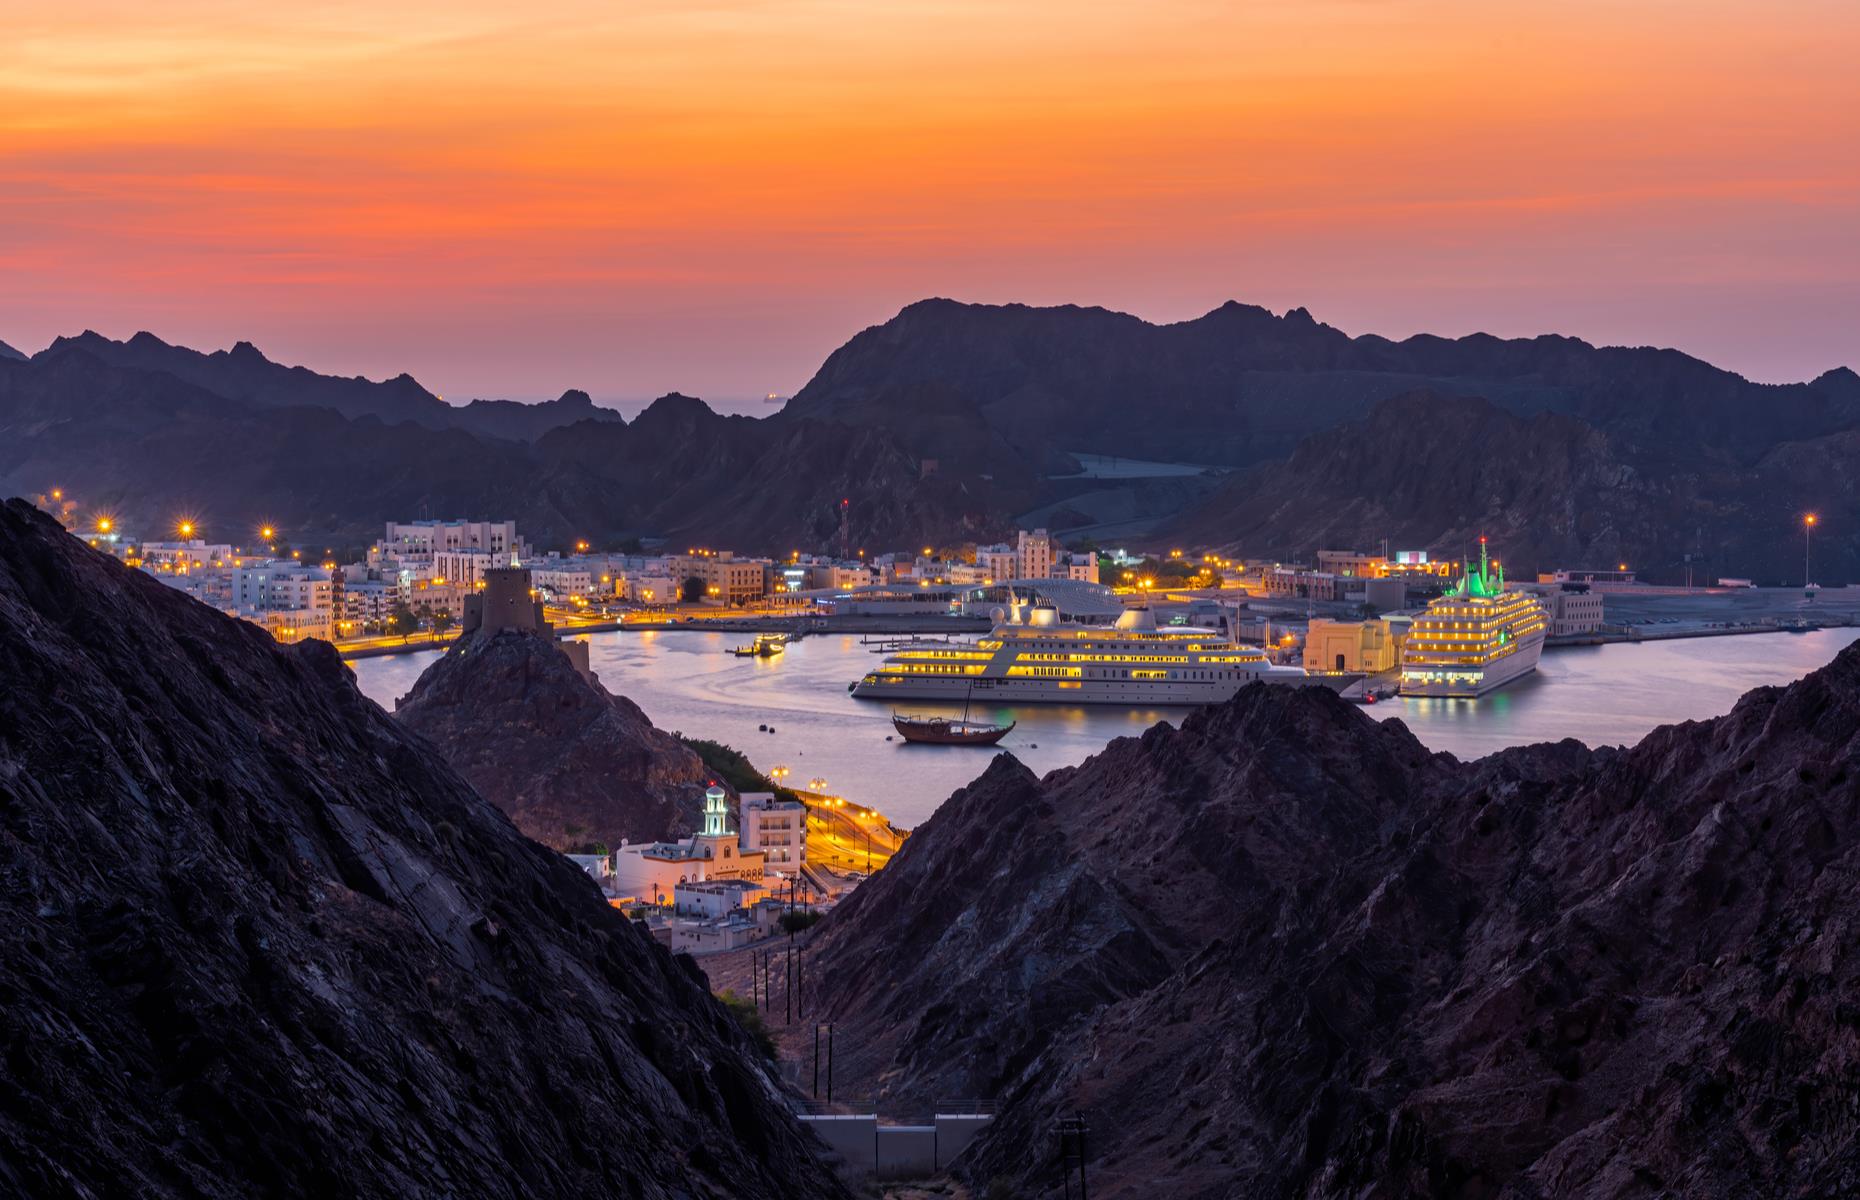 <p>Surrounded by jagged mountains, Muttrah Corniche is an attractive port on the western side of Muscat, the capital of Oman. The pretty waterfront is the city's old commercial center and still the place to be today with a daily fish market, a bustling souk filled with vendors and more.</p>